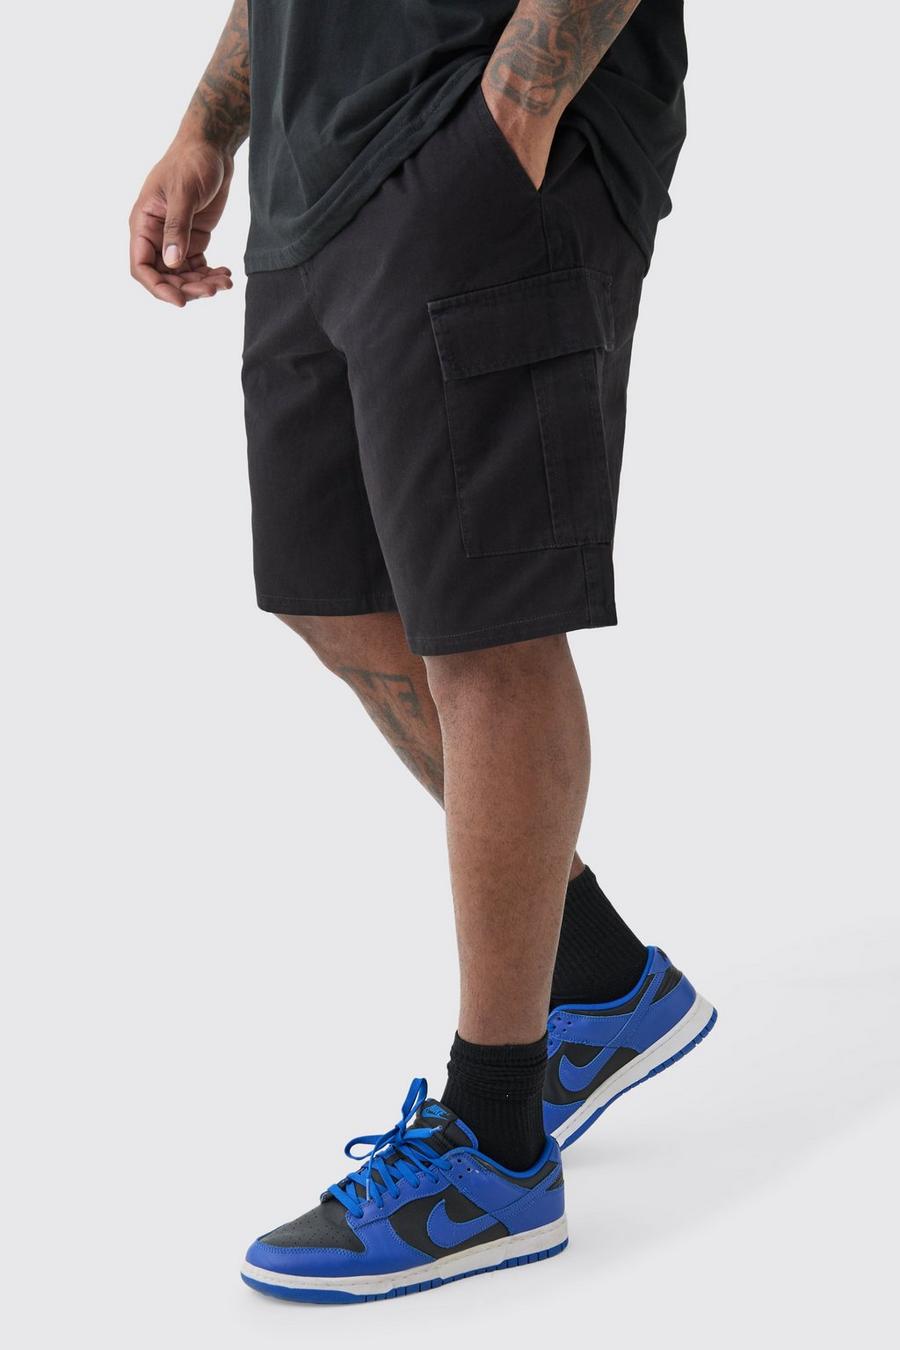 Plus Elasticated Waist Black Relaxed Fit Cargo Shorts